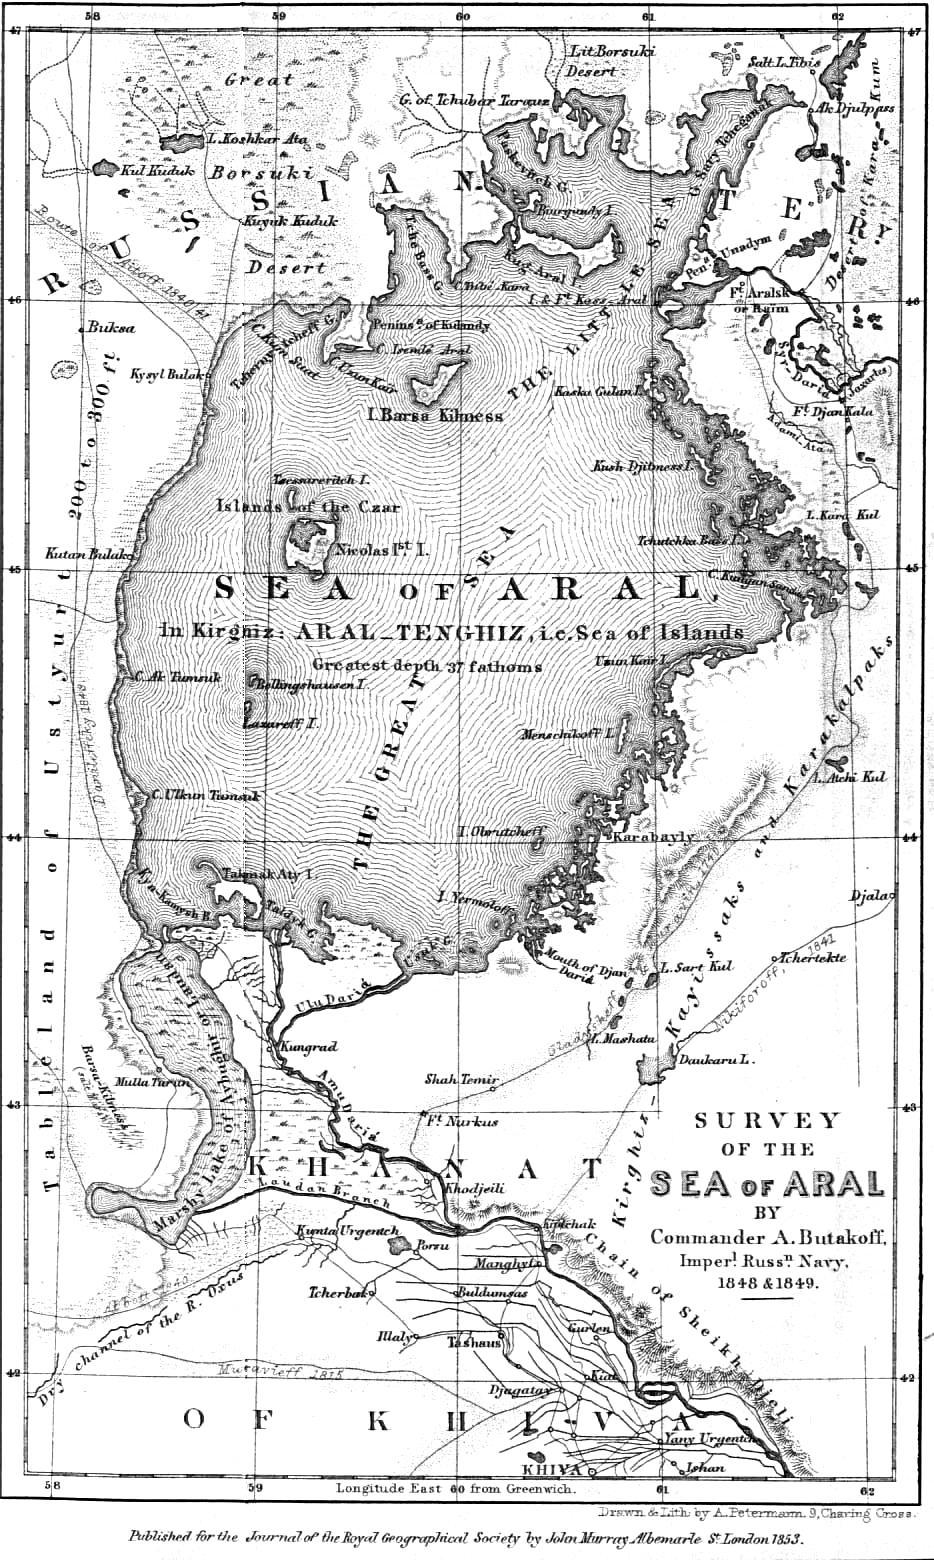 Survey_of_the_Sea_of_Aral_1853.jpg